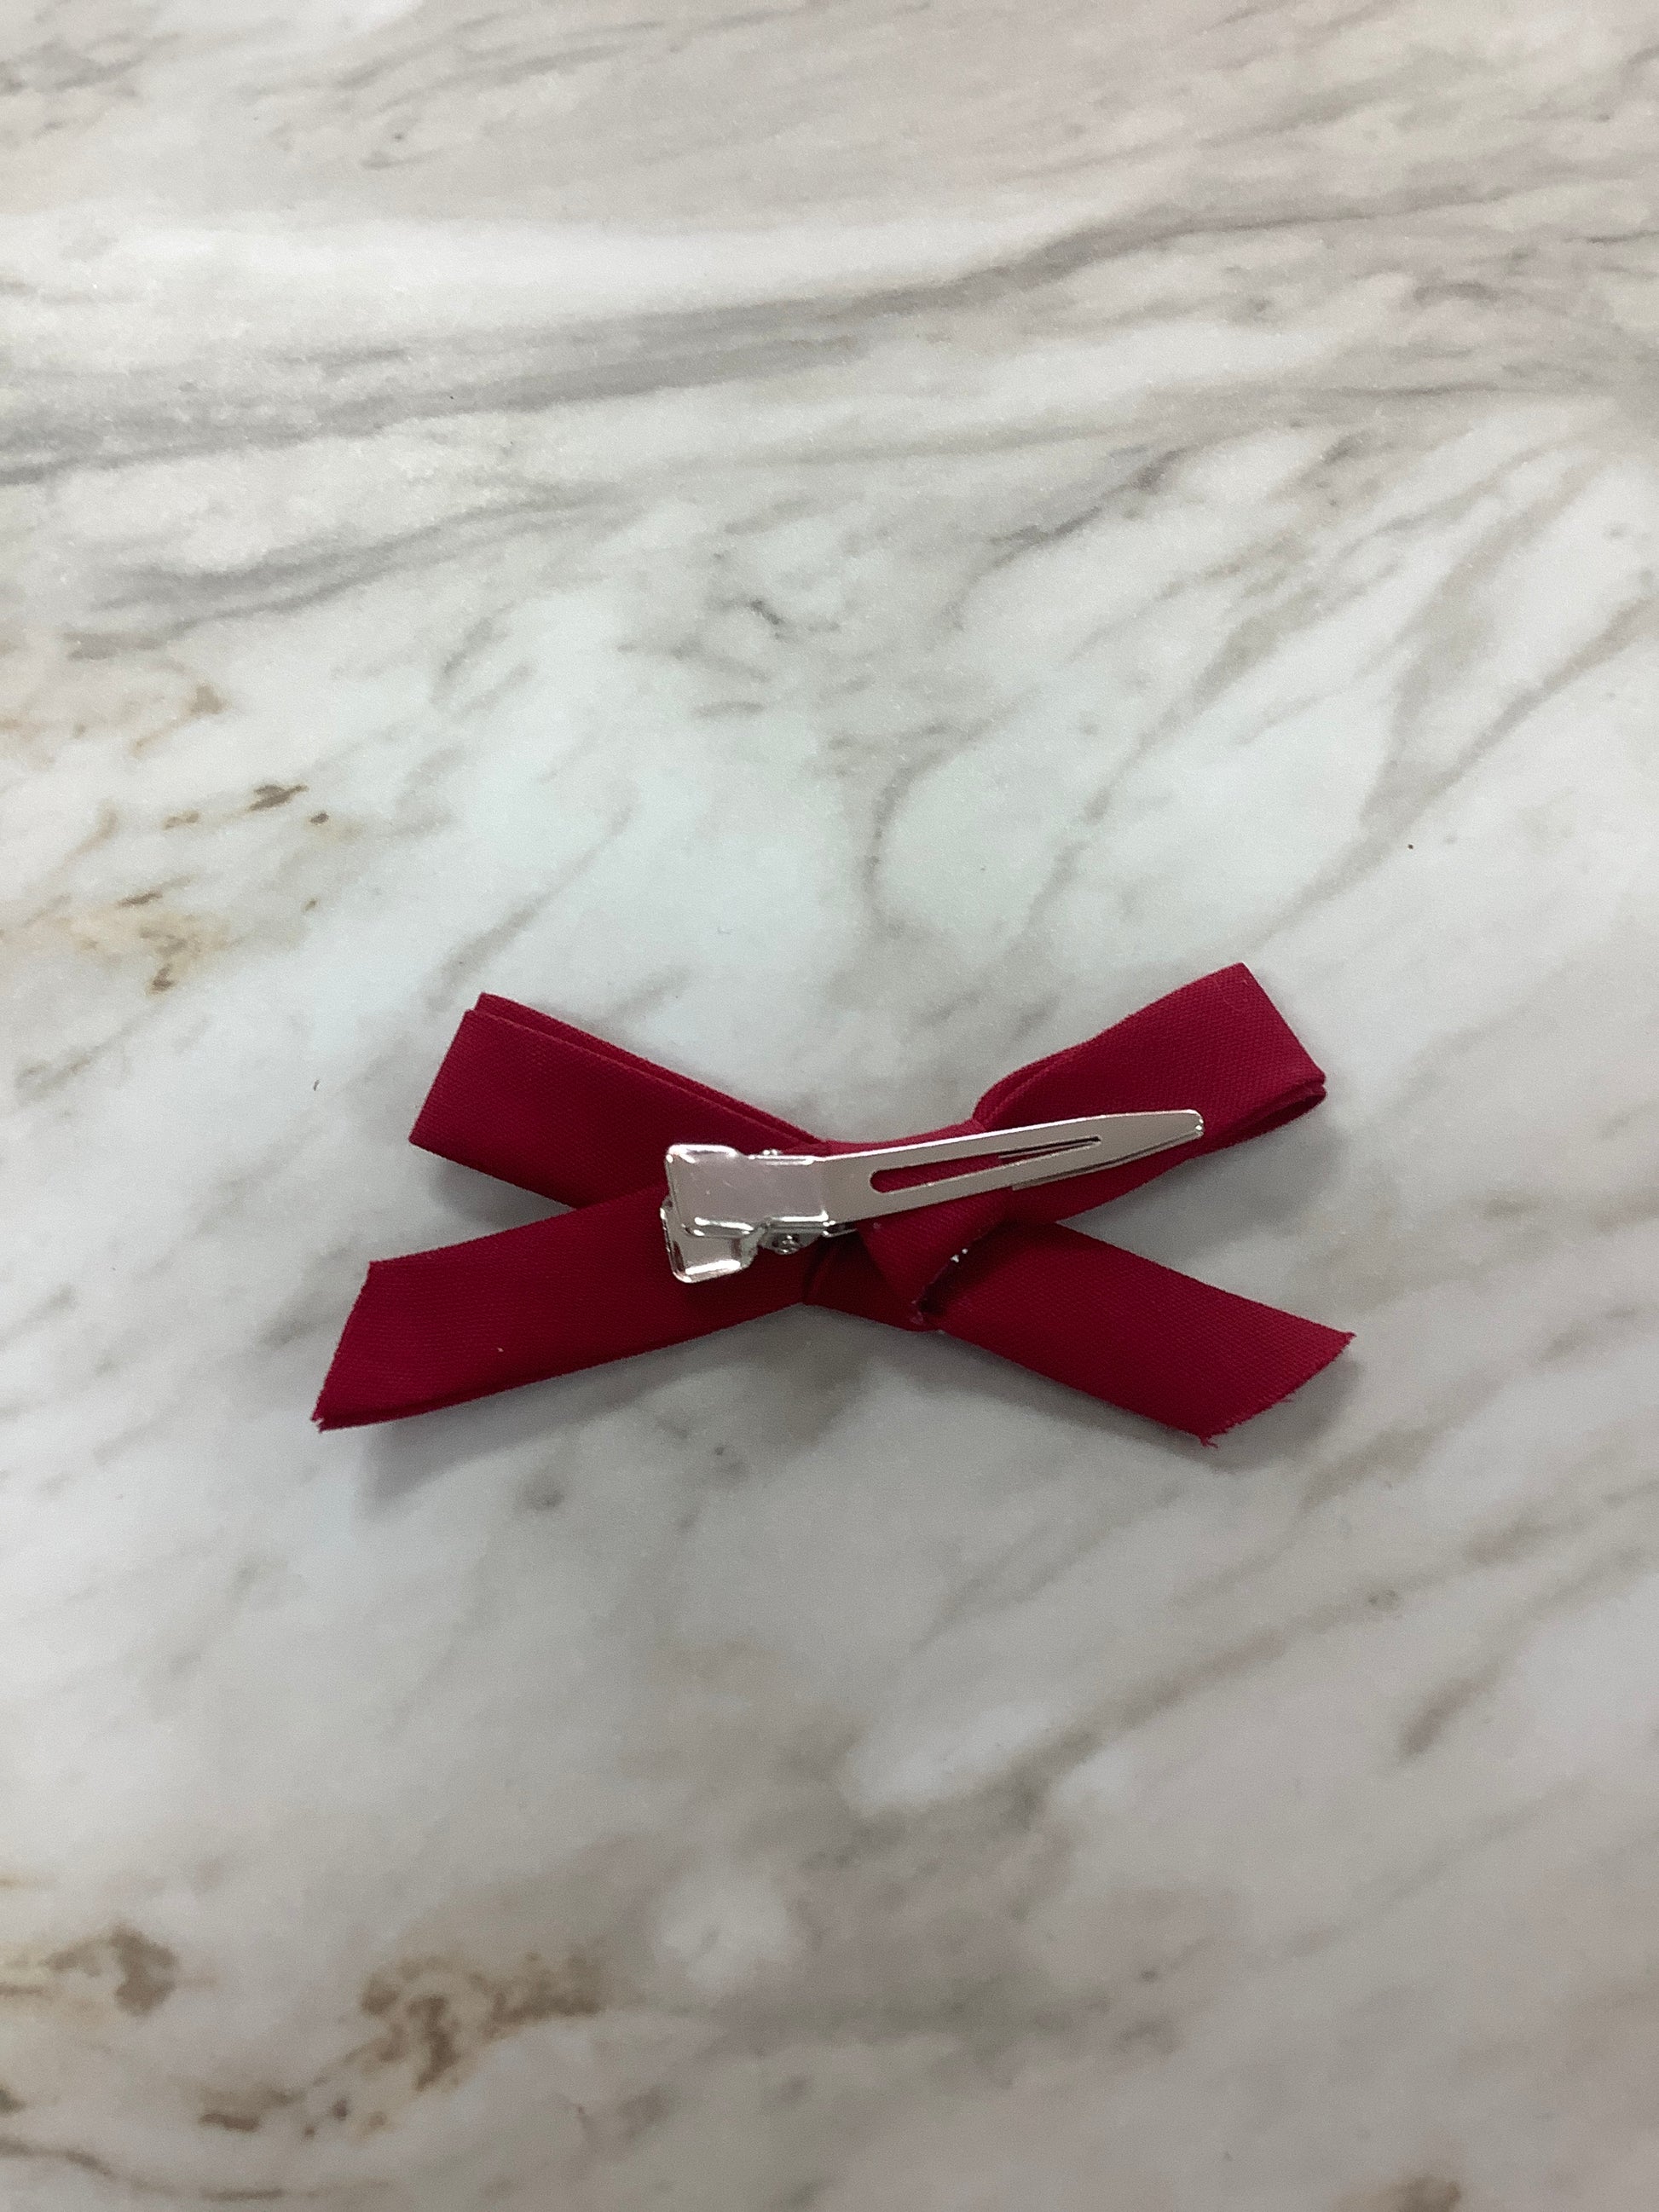 Hand Tied Bow on Clip in Maroon  - Doodlebug's Children's Boutique